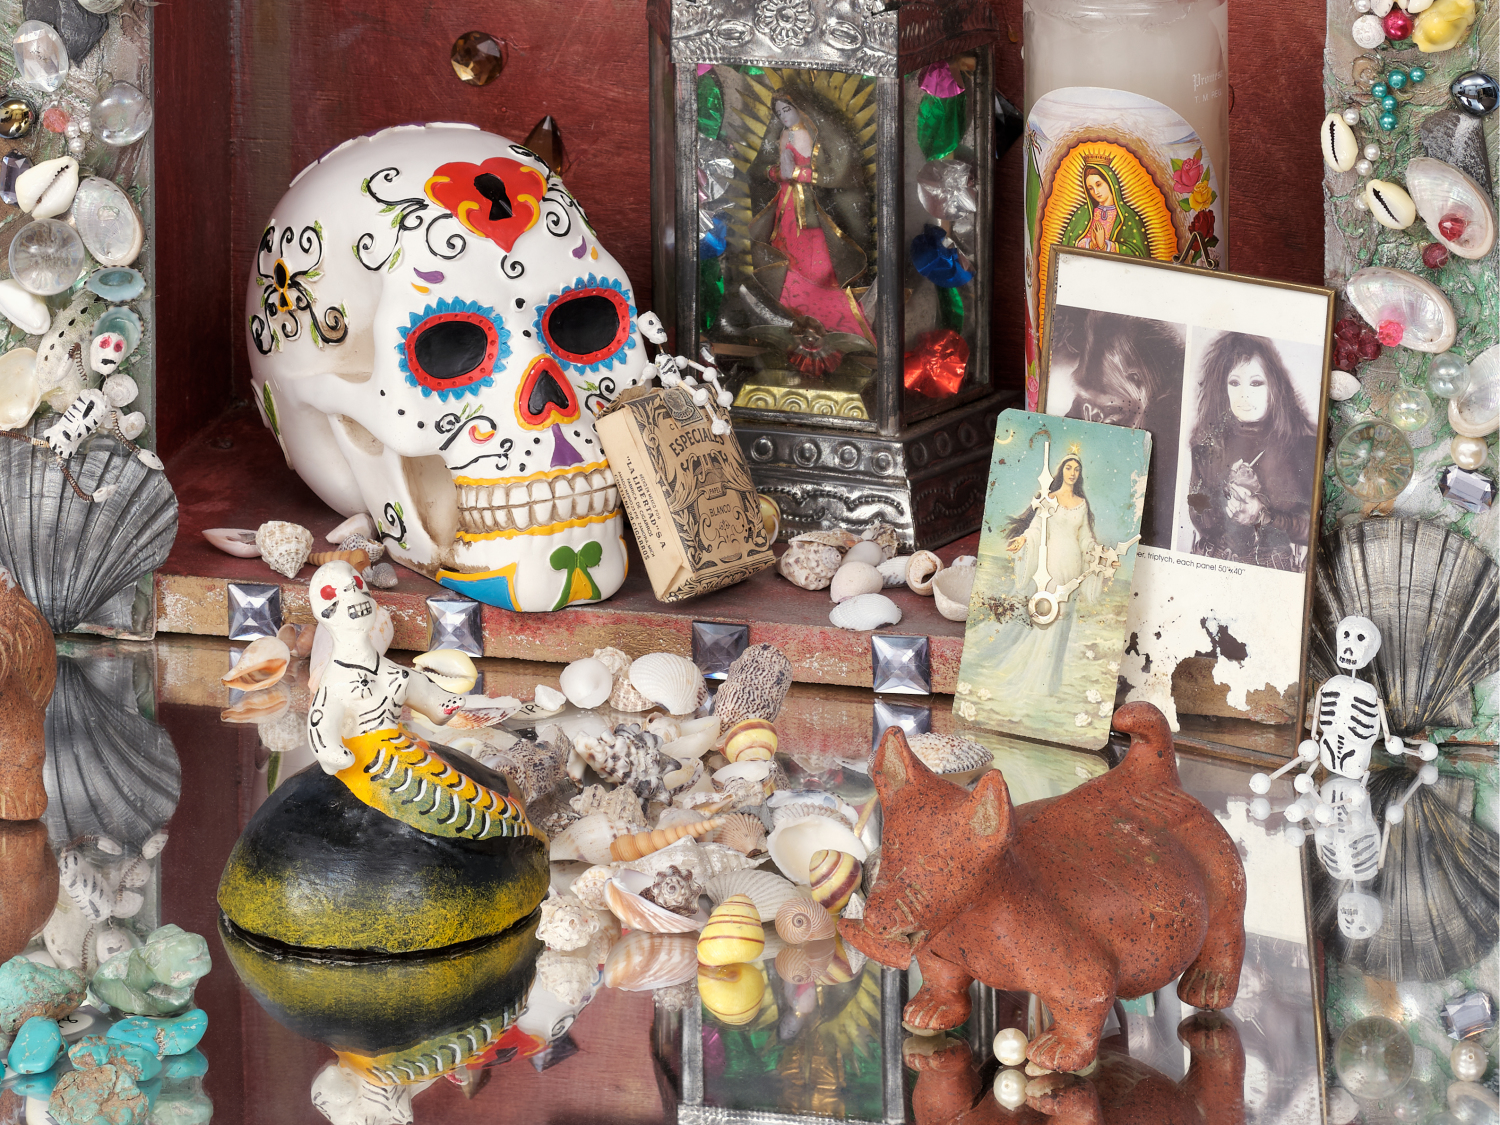 Amalia Mesa-Bains, Queen of the Waters, Mother of the Land of the Dead: Homenaje a Tonatzin/Guadalupe, 1992. Mixed media installation including fabric drape, six jeweled clocks, mirror pedestals with grottos, nicho box, found objects, dried flowers, dried pomegranate, potpourri; 120 x 216 x 72 in. Courtesy of the artist and Rena Bransten Gallery, San Francisco.